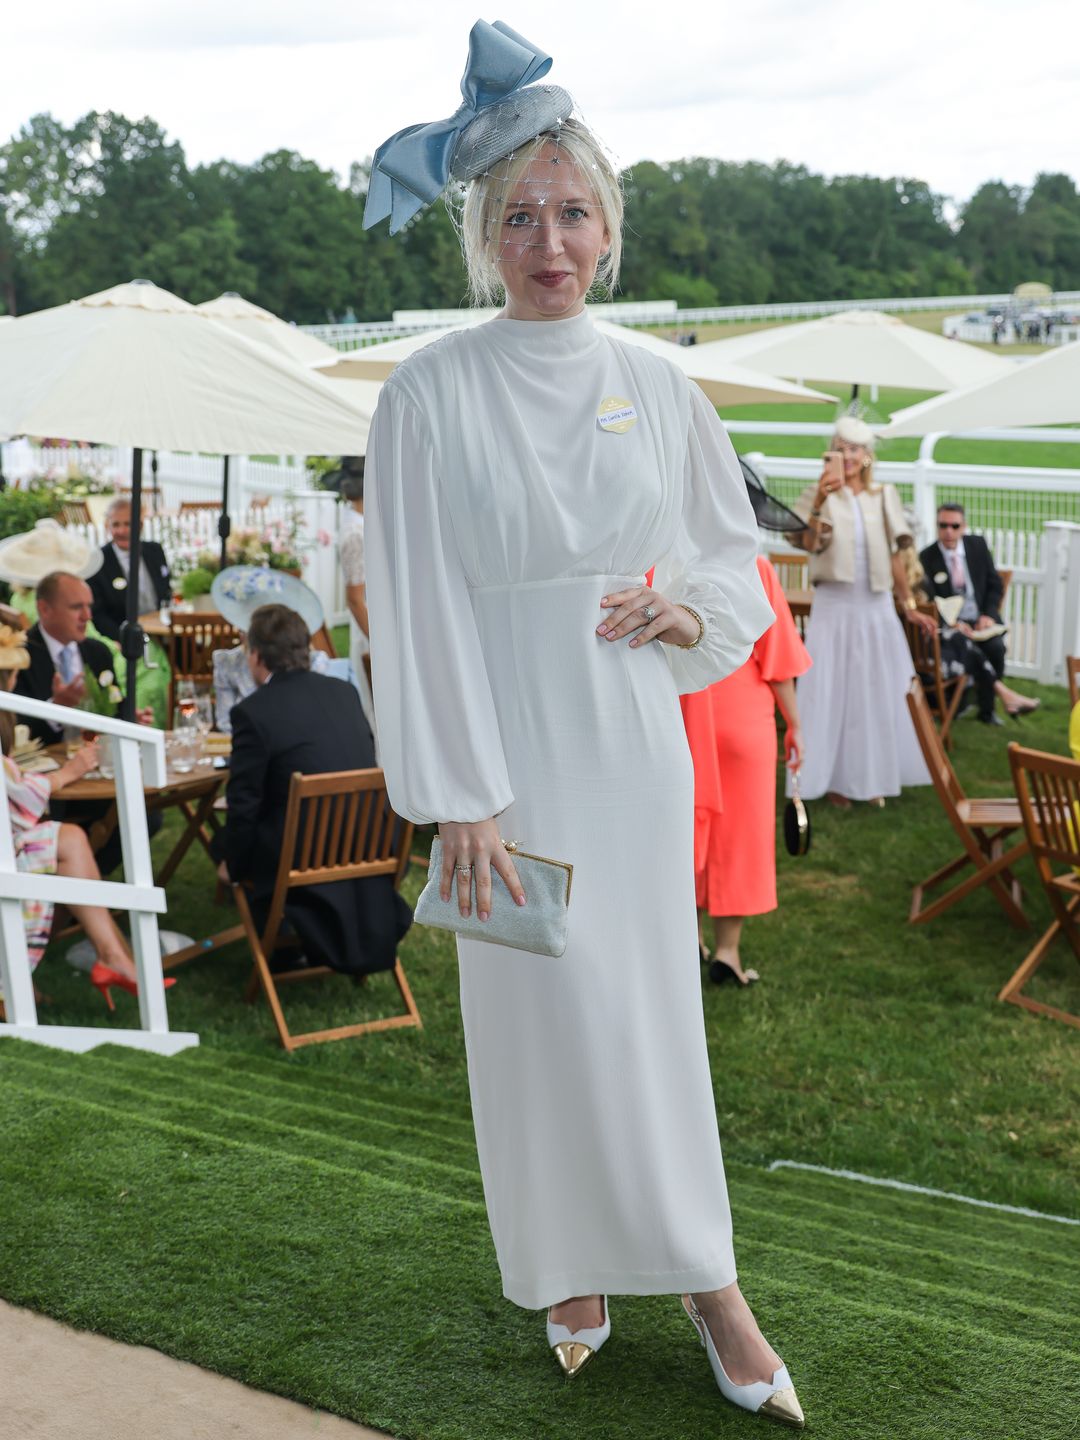 Shoe designer Camilla Elphick attended day two of Royal Ascot wearing dazzling rings from Chupi, a Suki London dress, Awon Golding headpiece, and shoes from her eponymous label, Camilla Elphick.